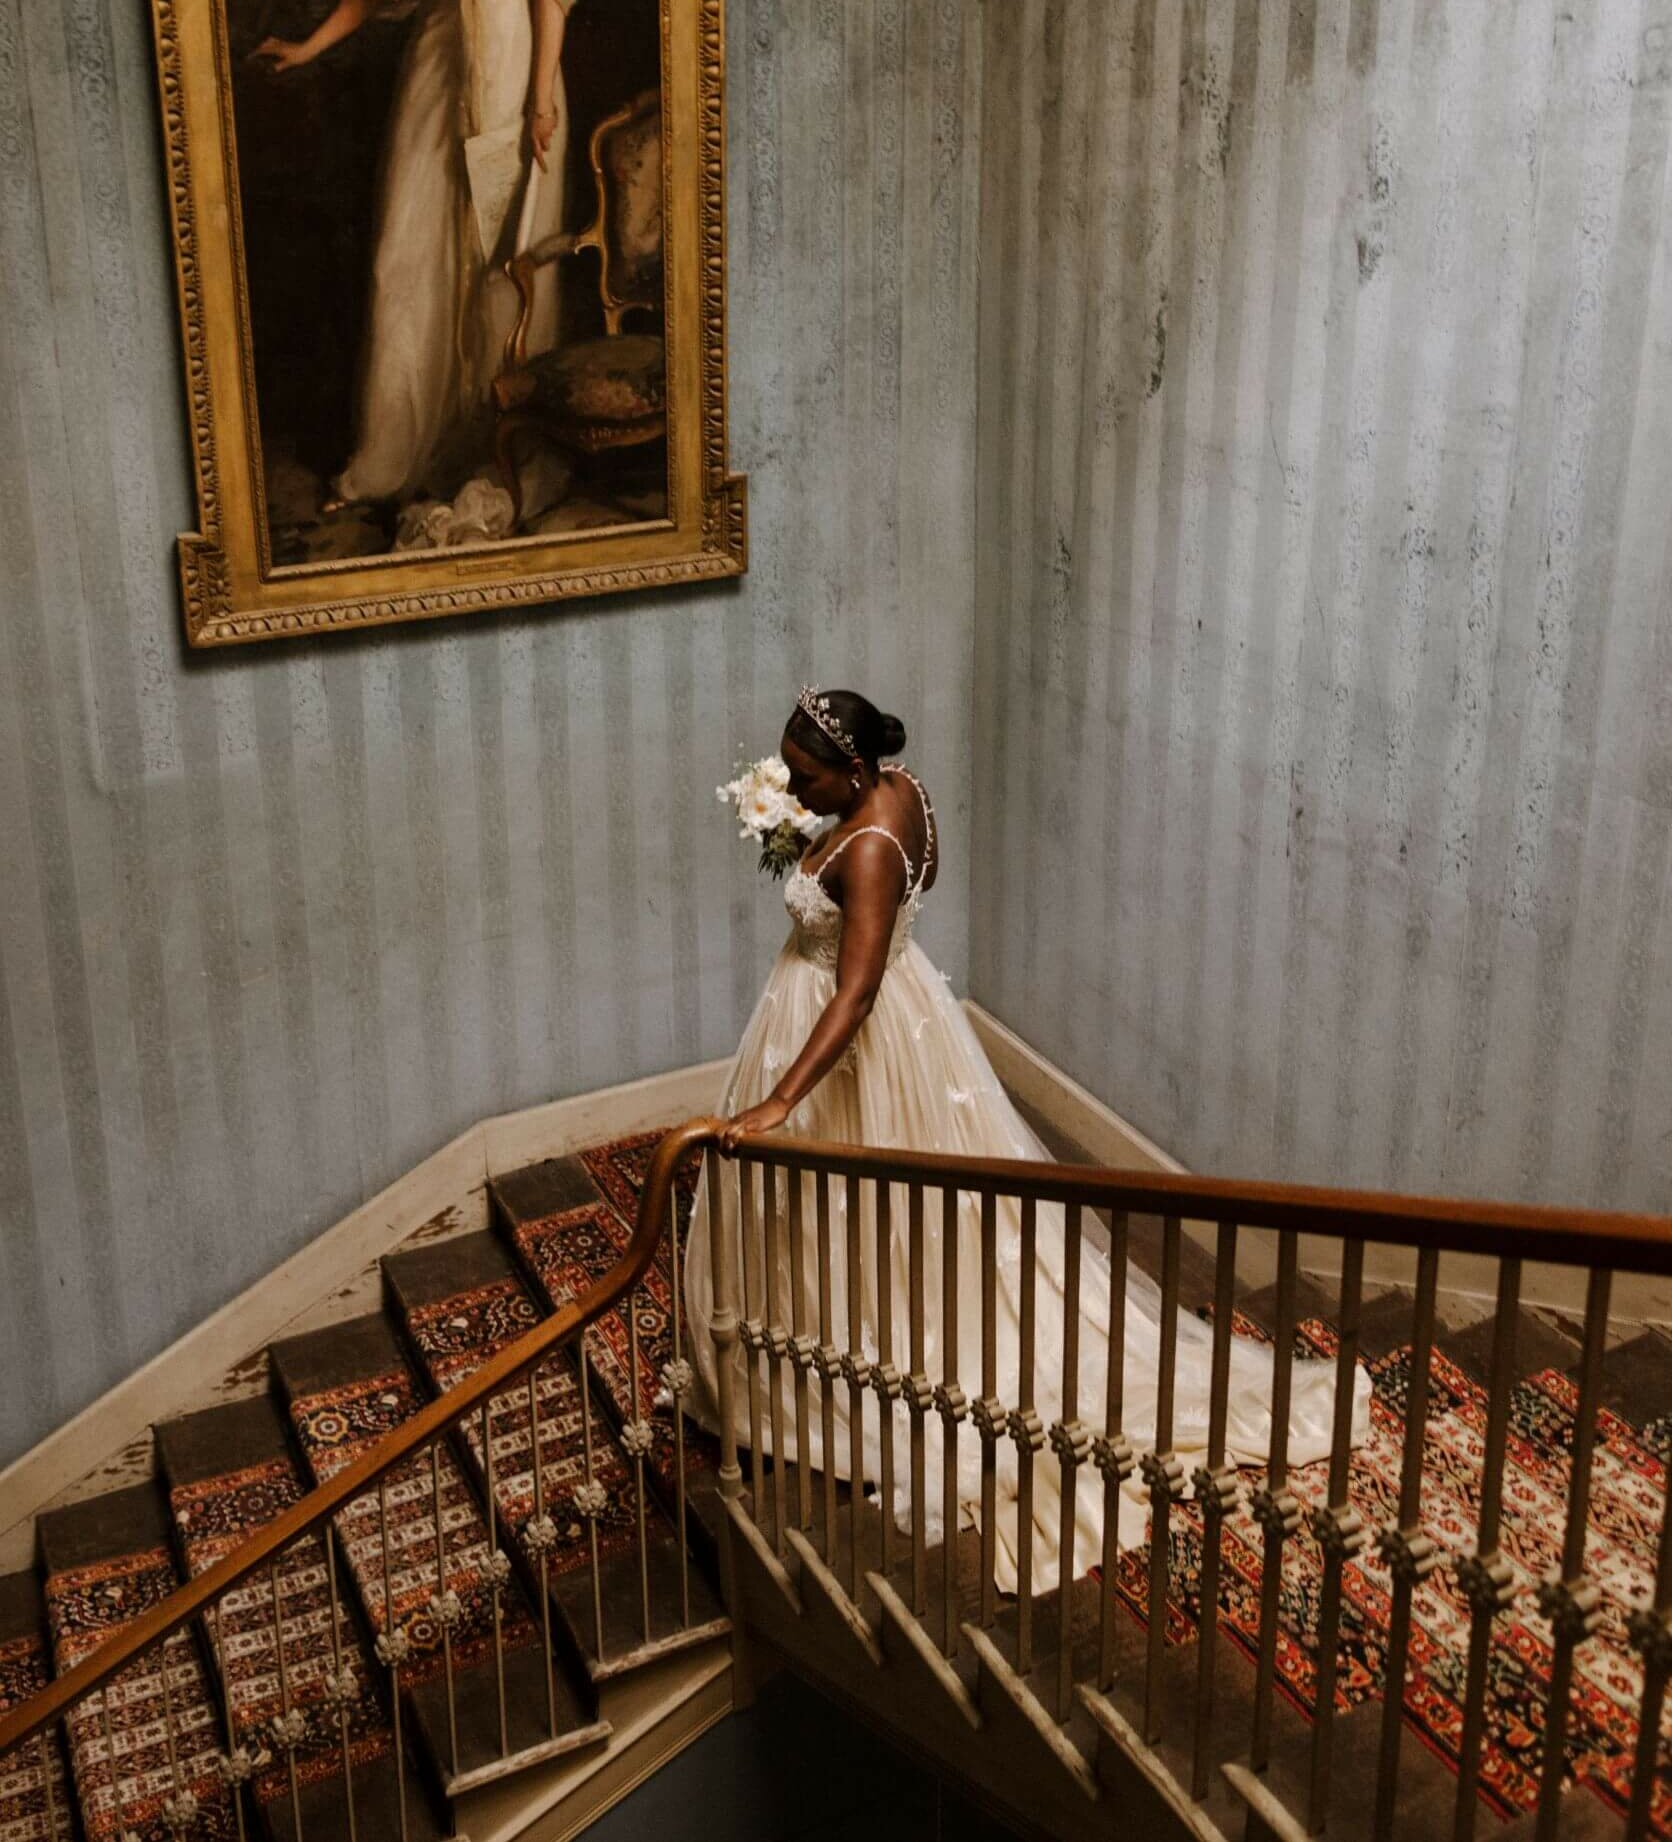 A bride in a custom made gold wedding dress descends a grand stair case to walkdown the aisle